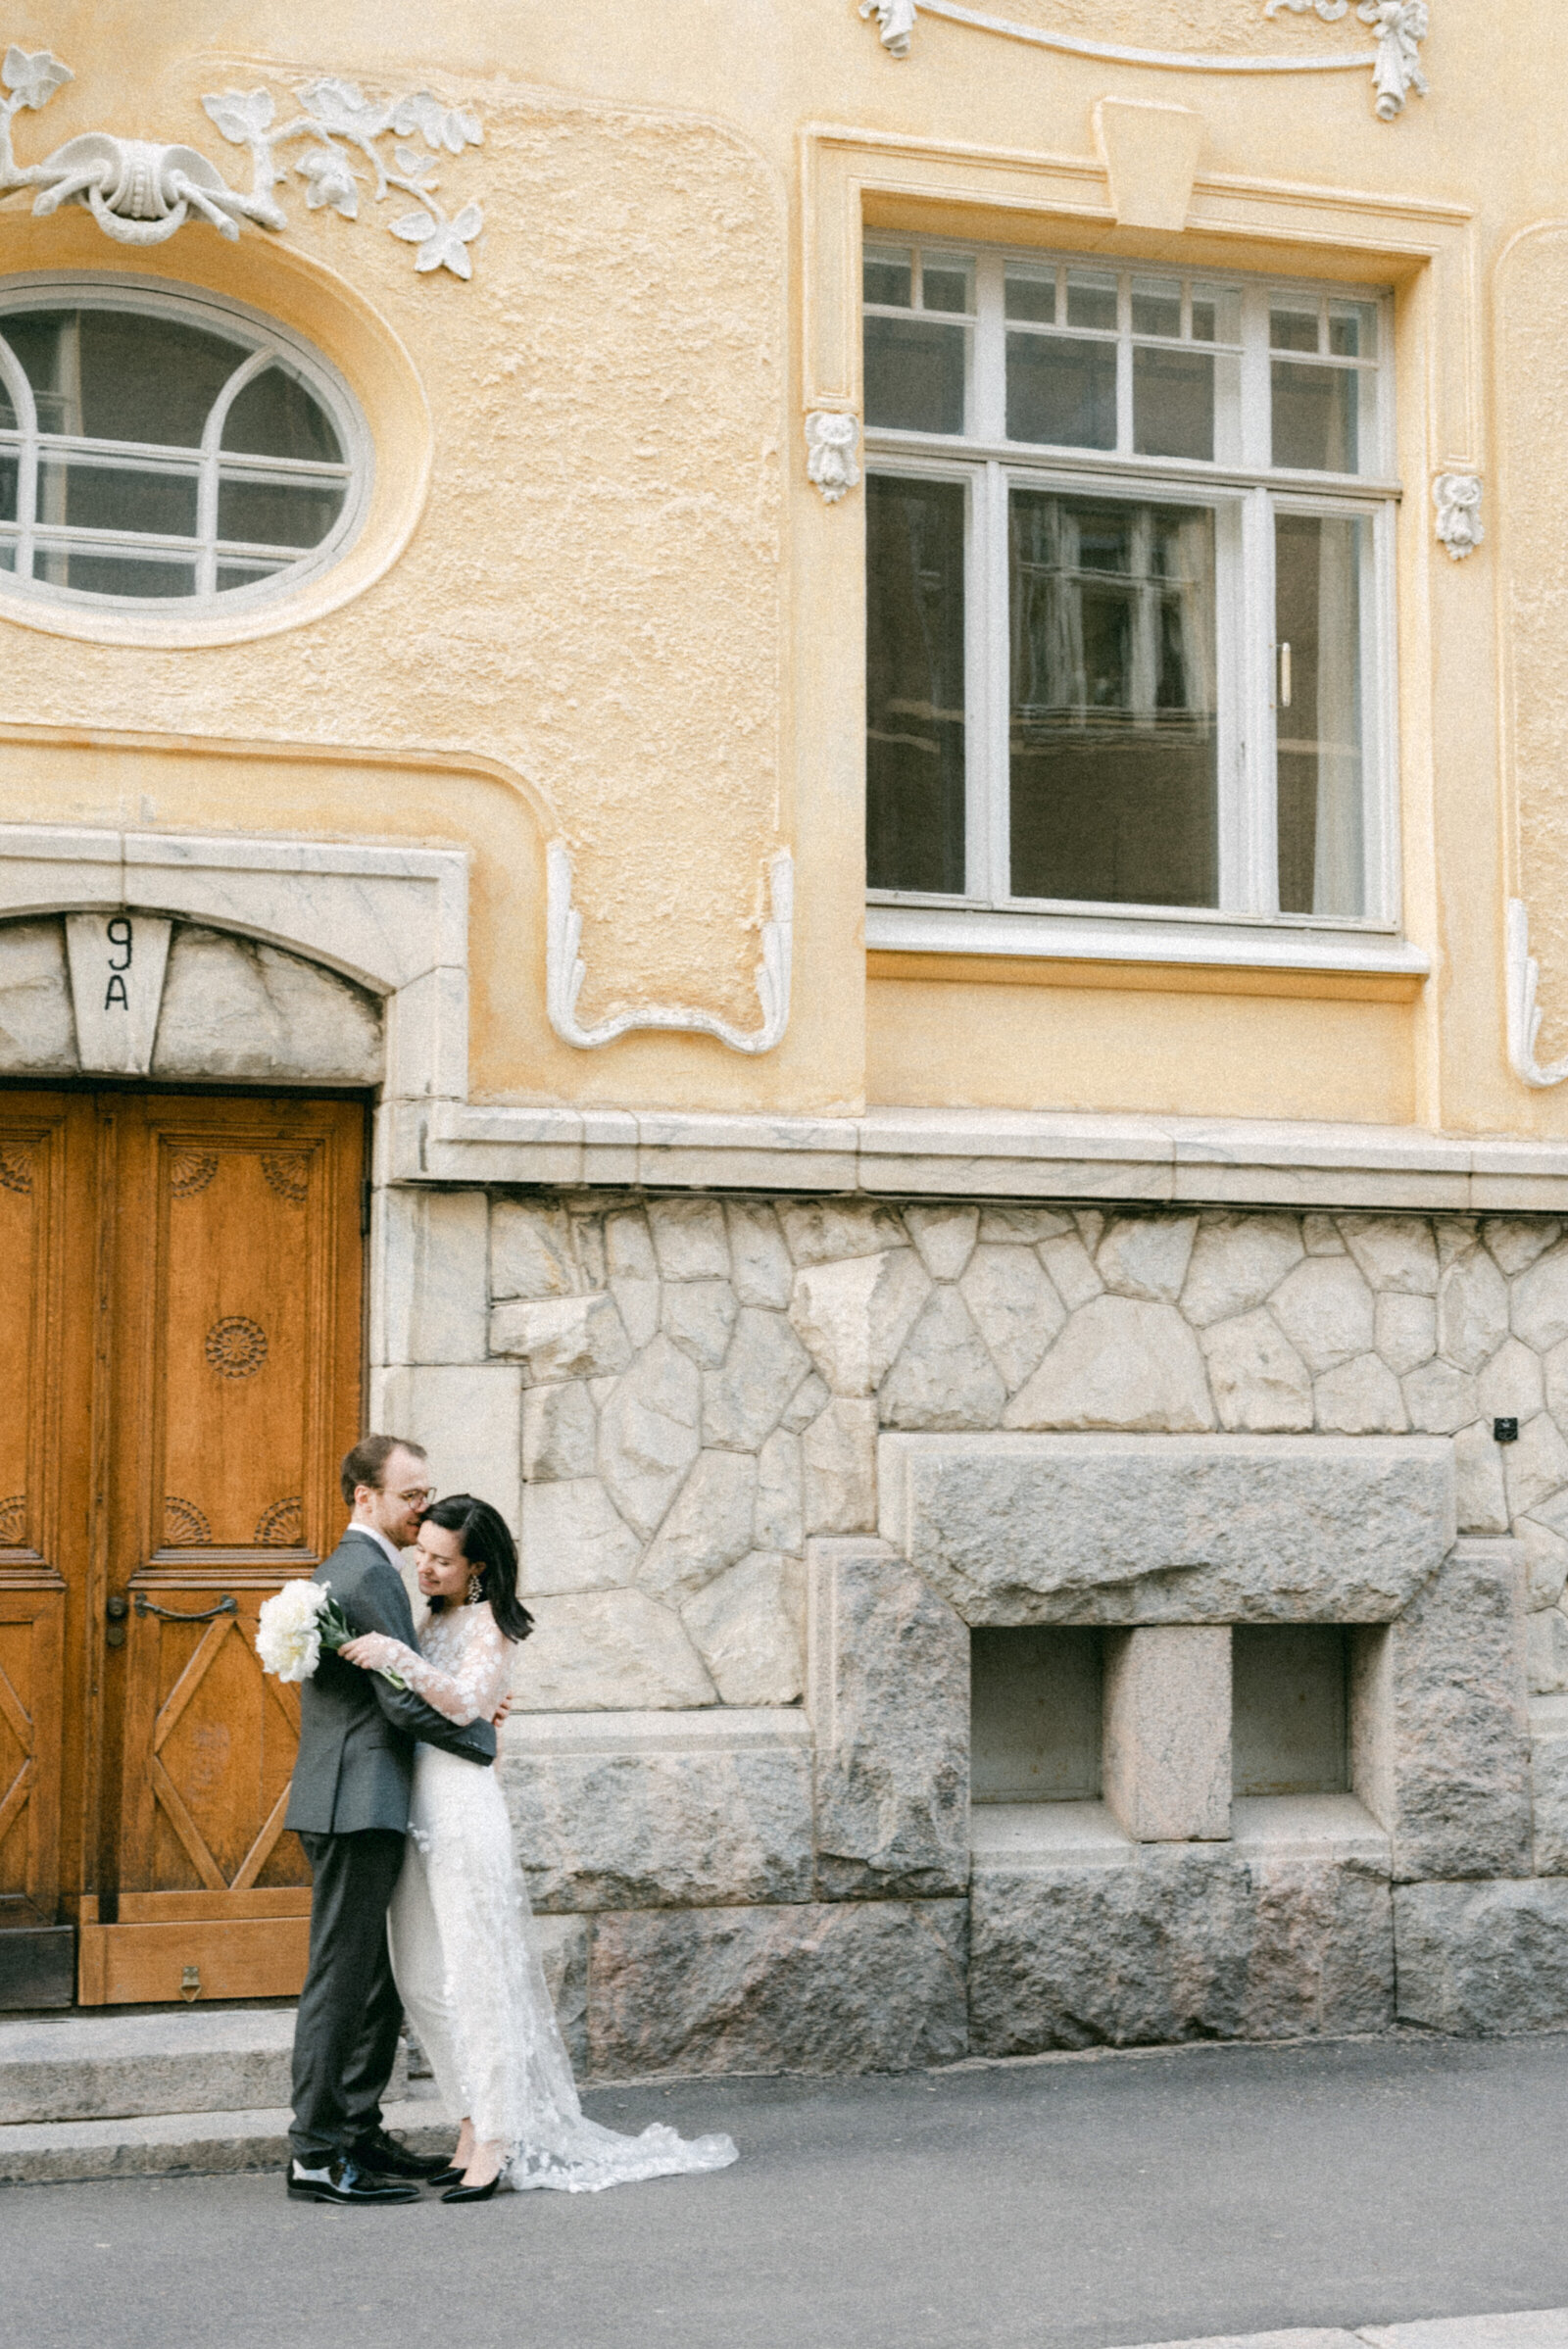 A wedding coulple photographed by  the wedding photographer Hannika Gabrielsson in front of  a yellow building in Helsinki.